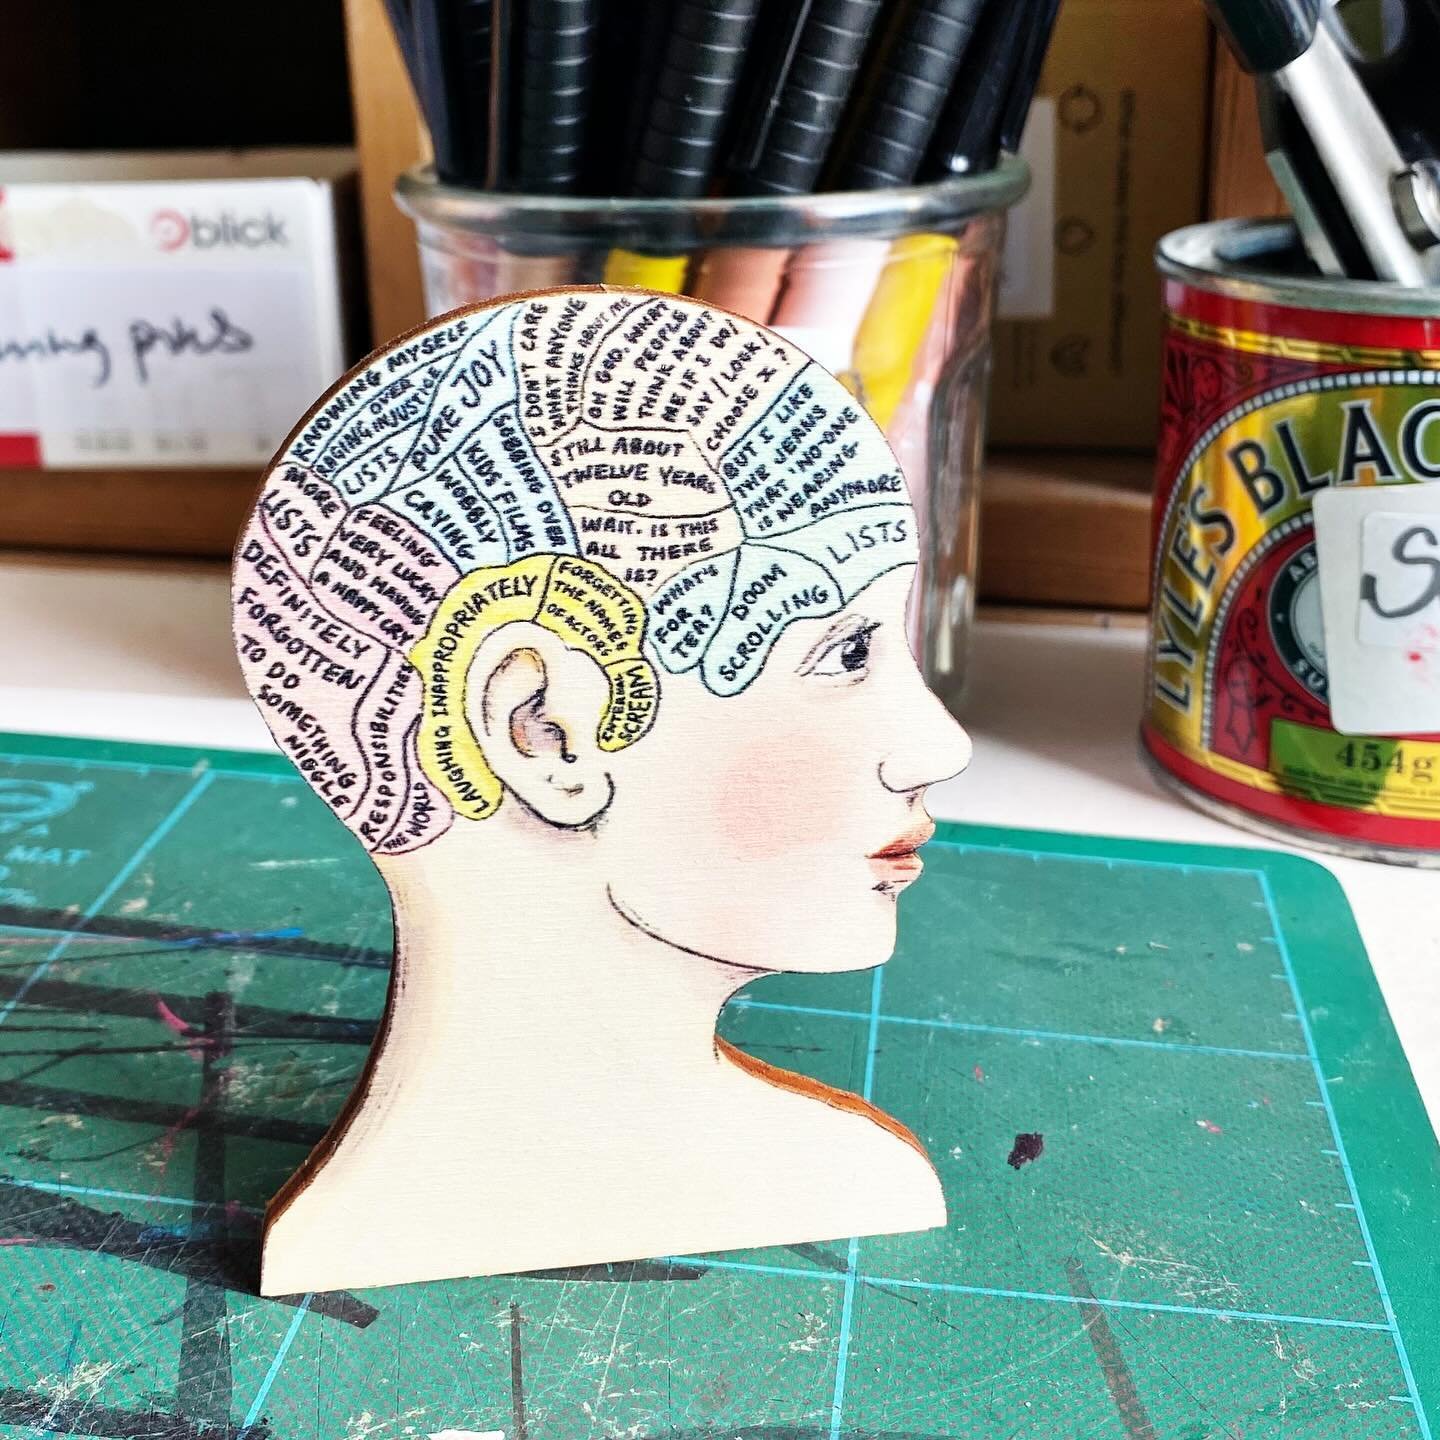 Mover over Build A Bear, we&rsquo;re doing Build A Brain!
The collection goes live on Sunday but is already available to newsletter subscribers.
You can choose from a desk buddy,
Hanging decoration or 
Print
There&rsquo;s the Phrenology of Midlife ve